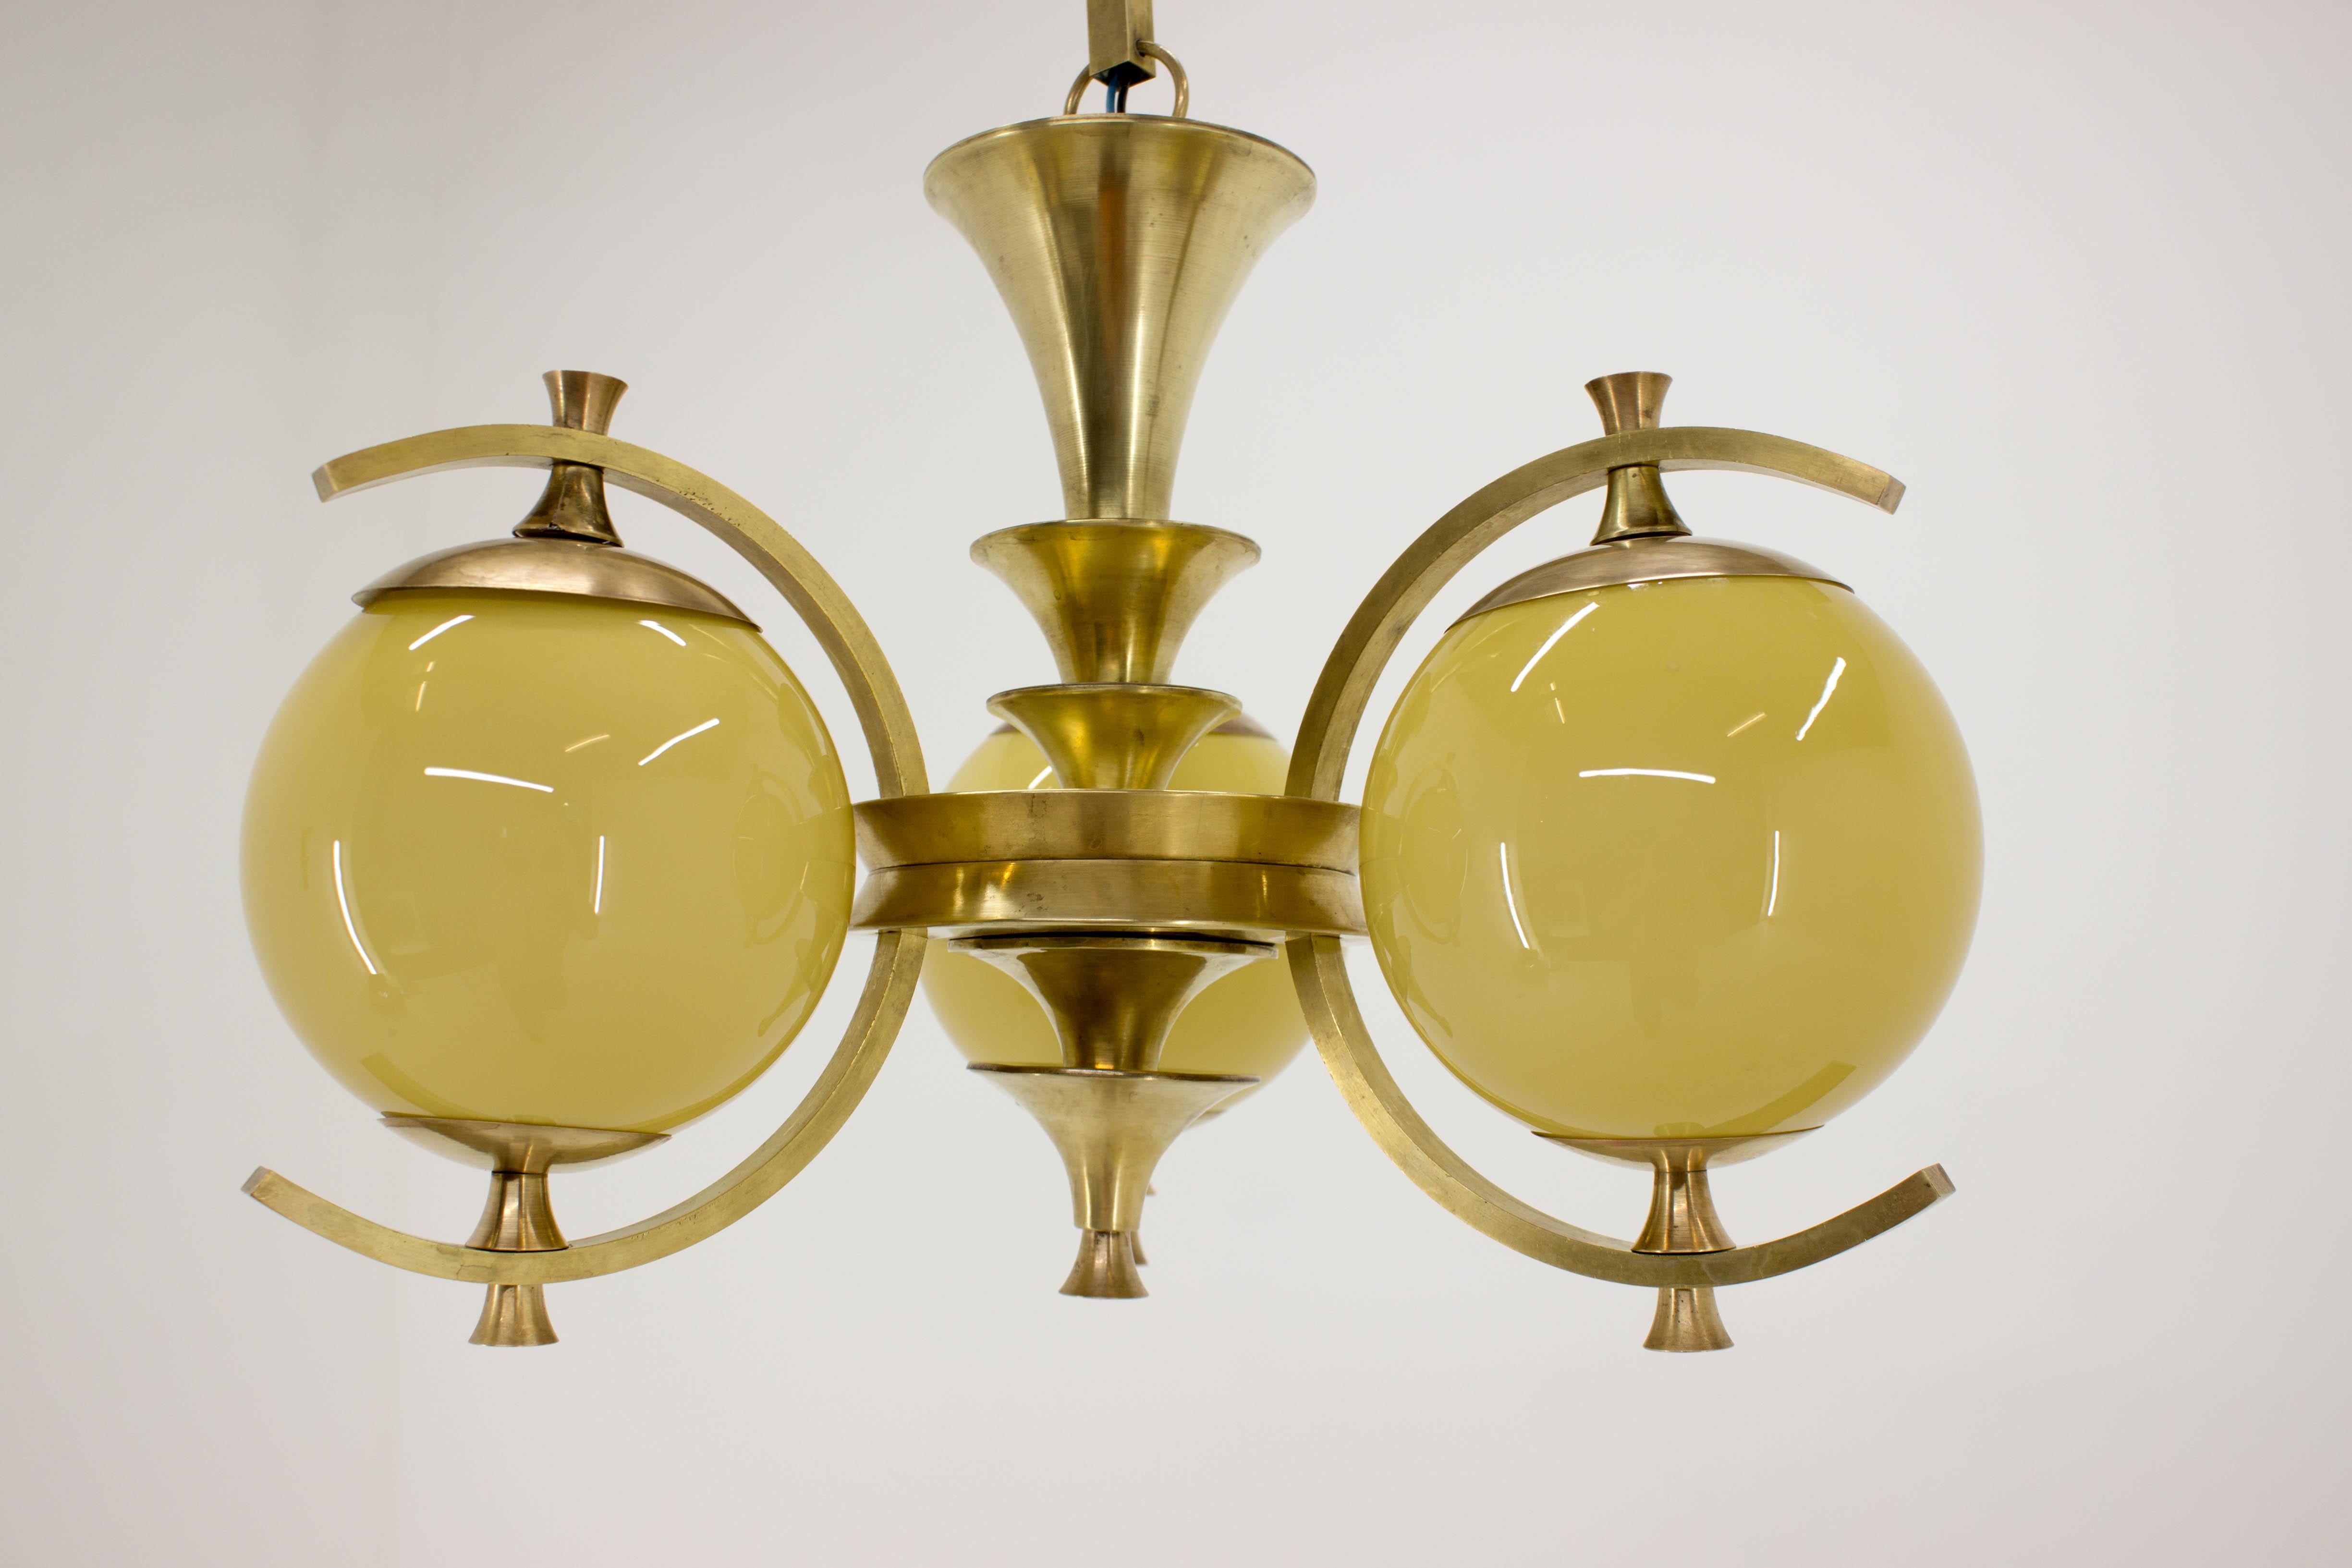 Czech Rare Brass Chandelier in Rondocubistic Style, 1920s